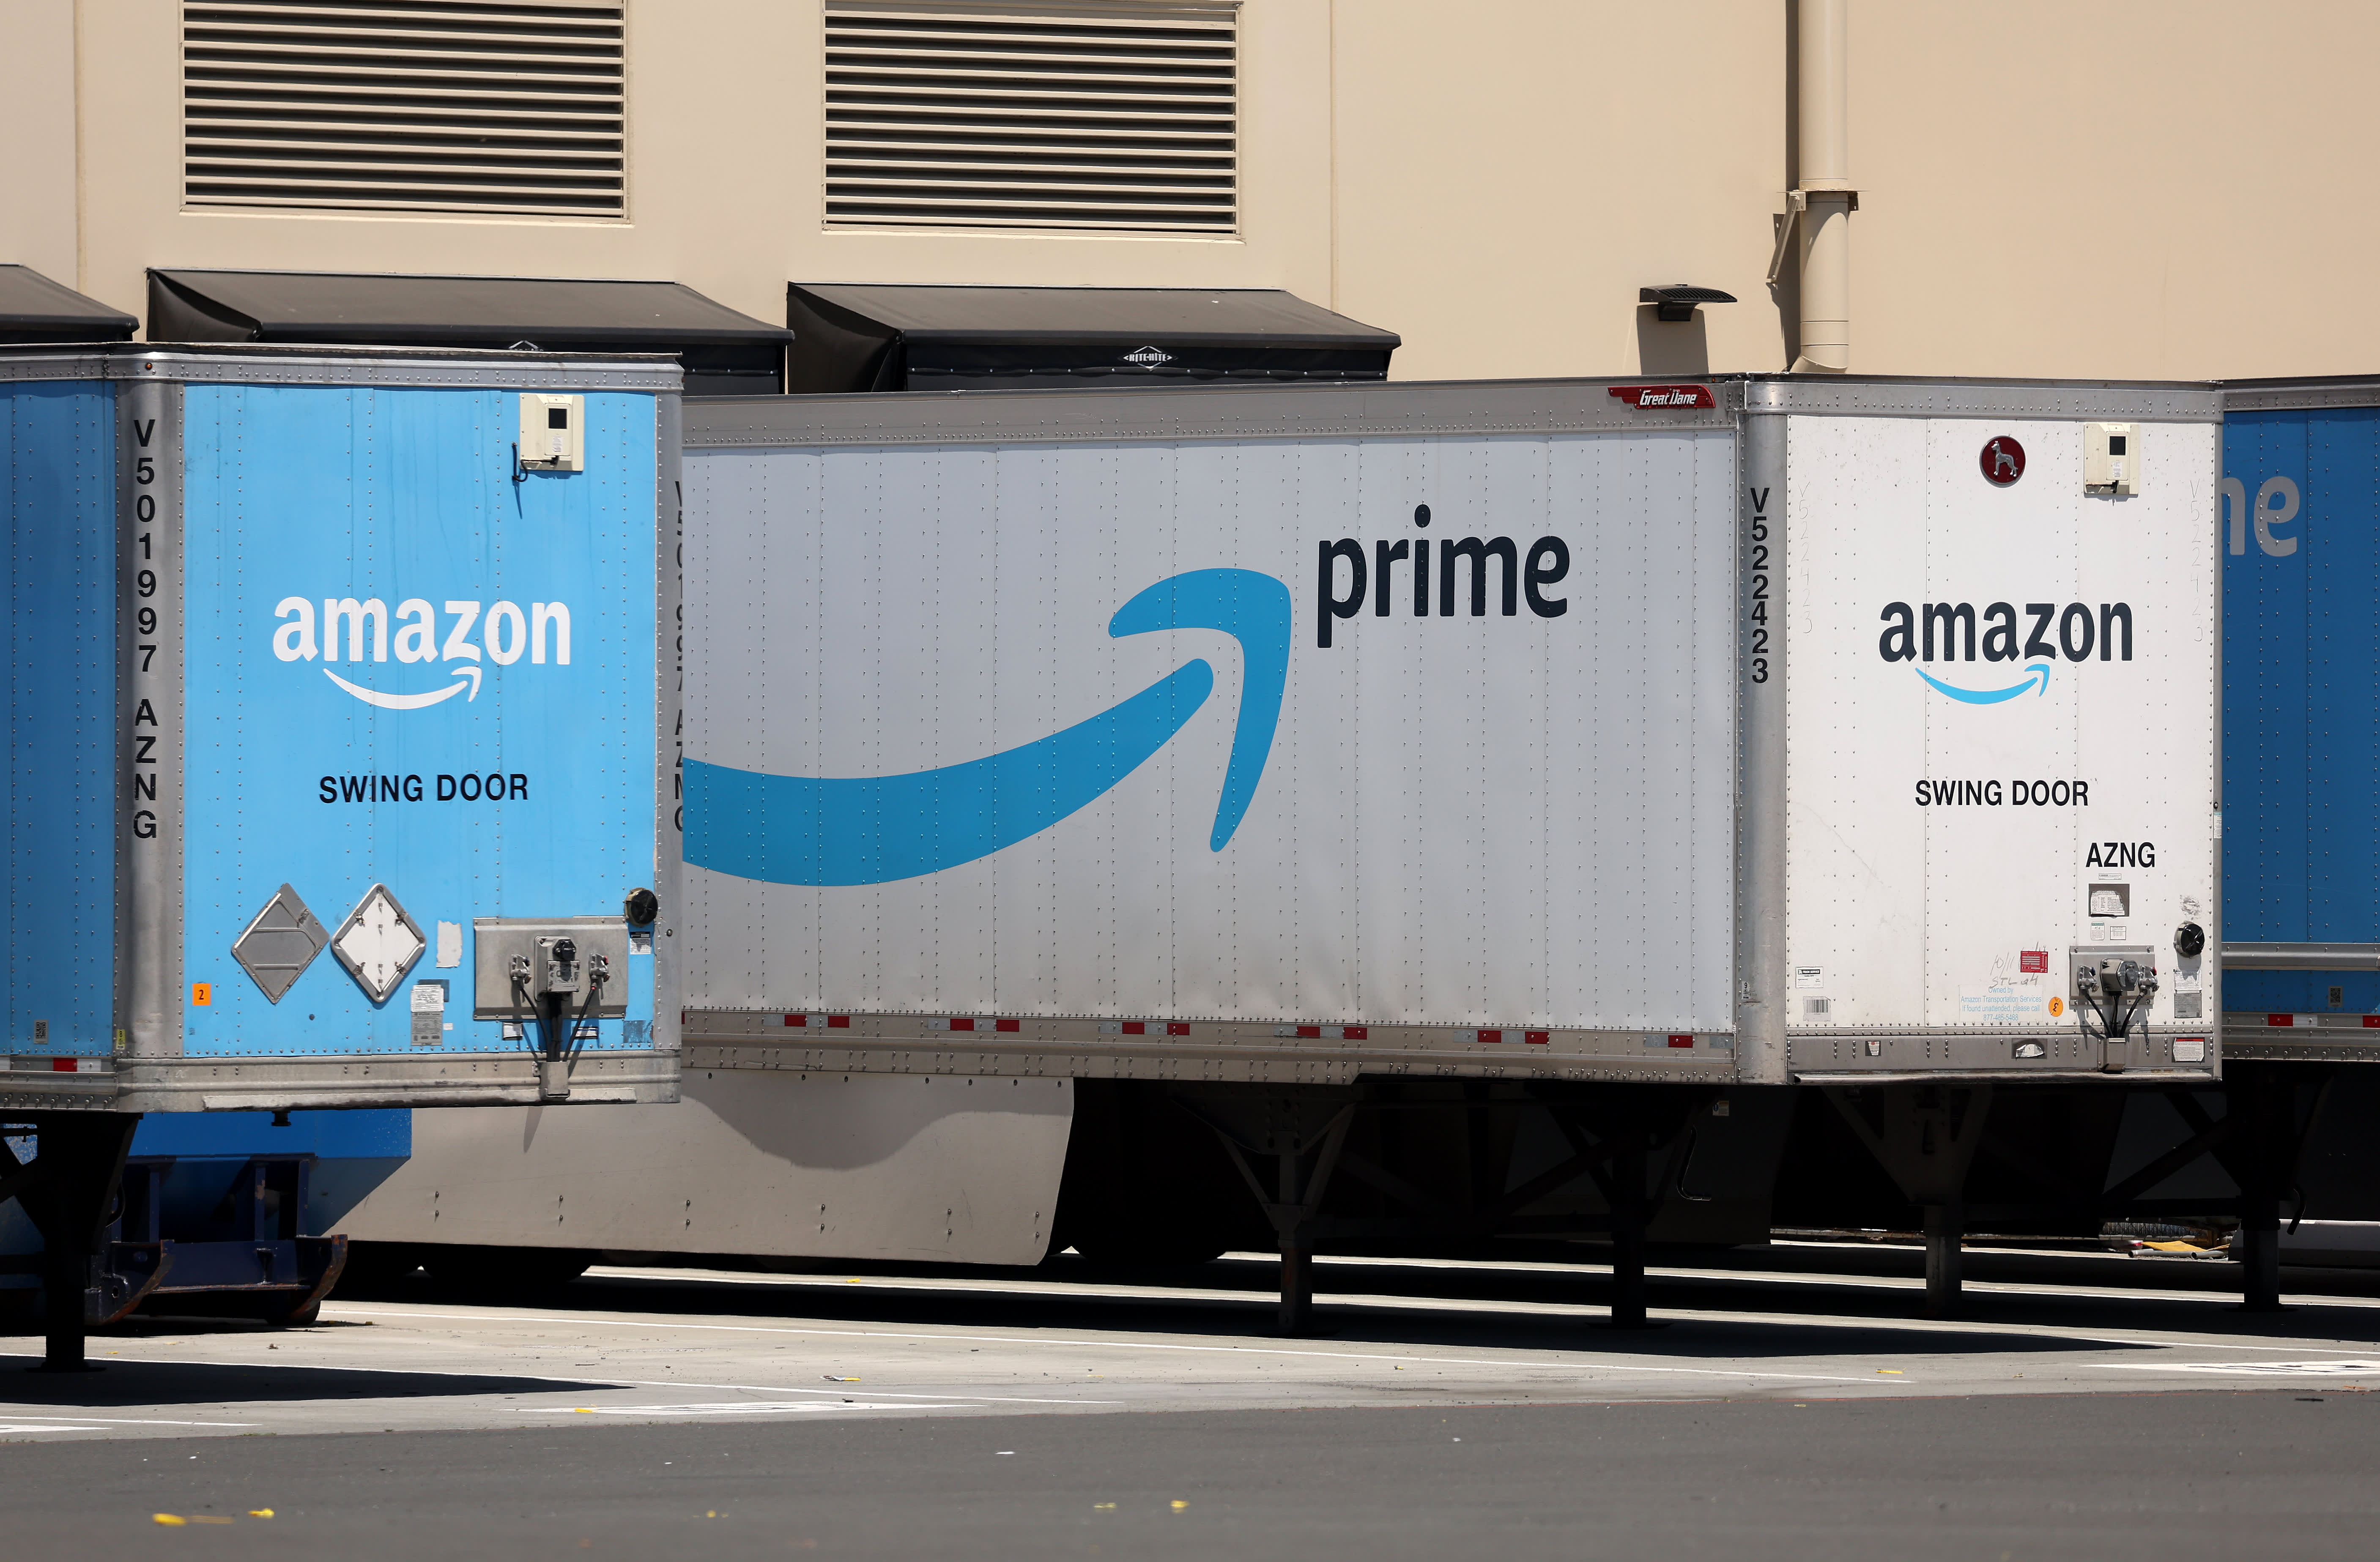 Here's the trade on Amazon heading into earnings, according to analysts